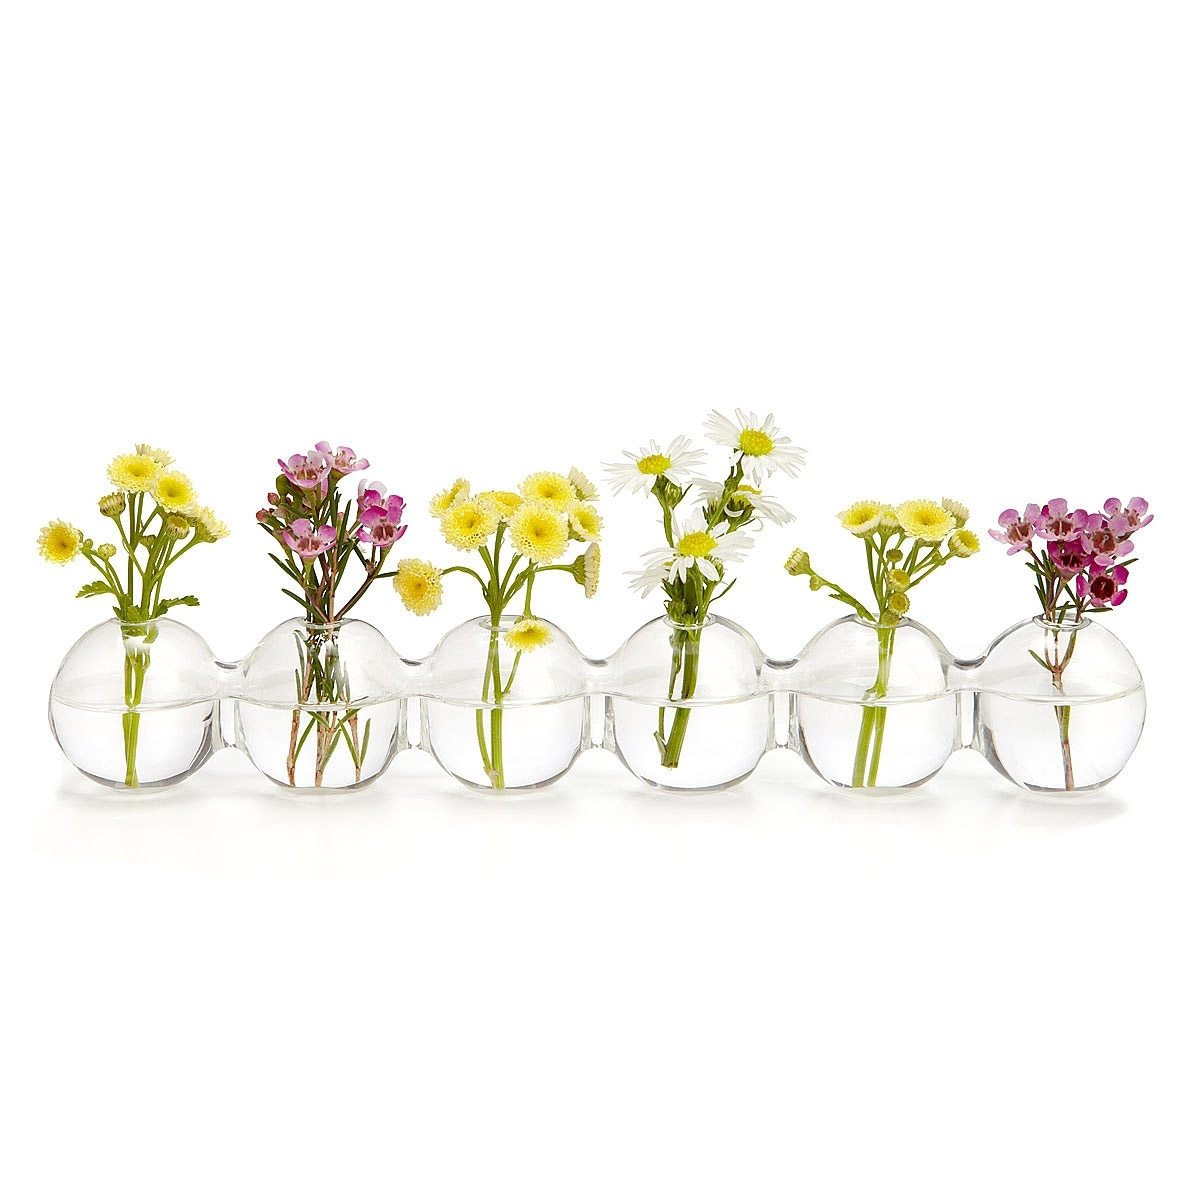 21 Recommended Little Vases In Bulk 2022 free download little vases in bulk of small vases for flowers vase and cellar image avorcor com with regard to vases design pictures awesome sle small bulk